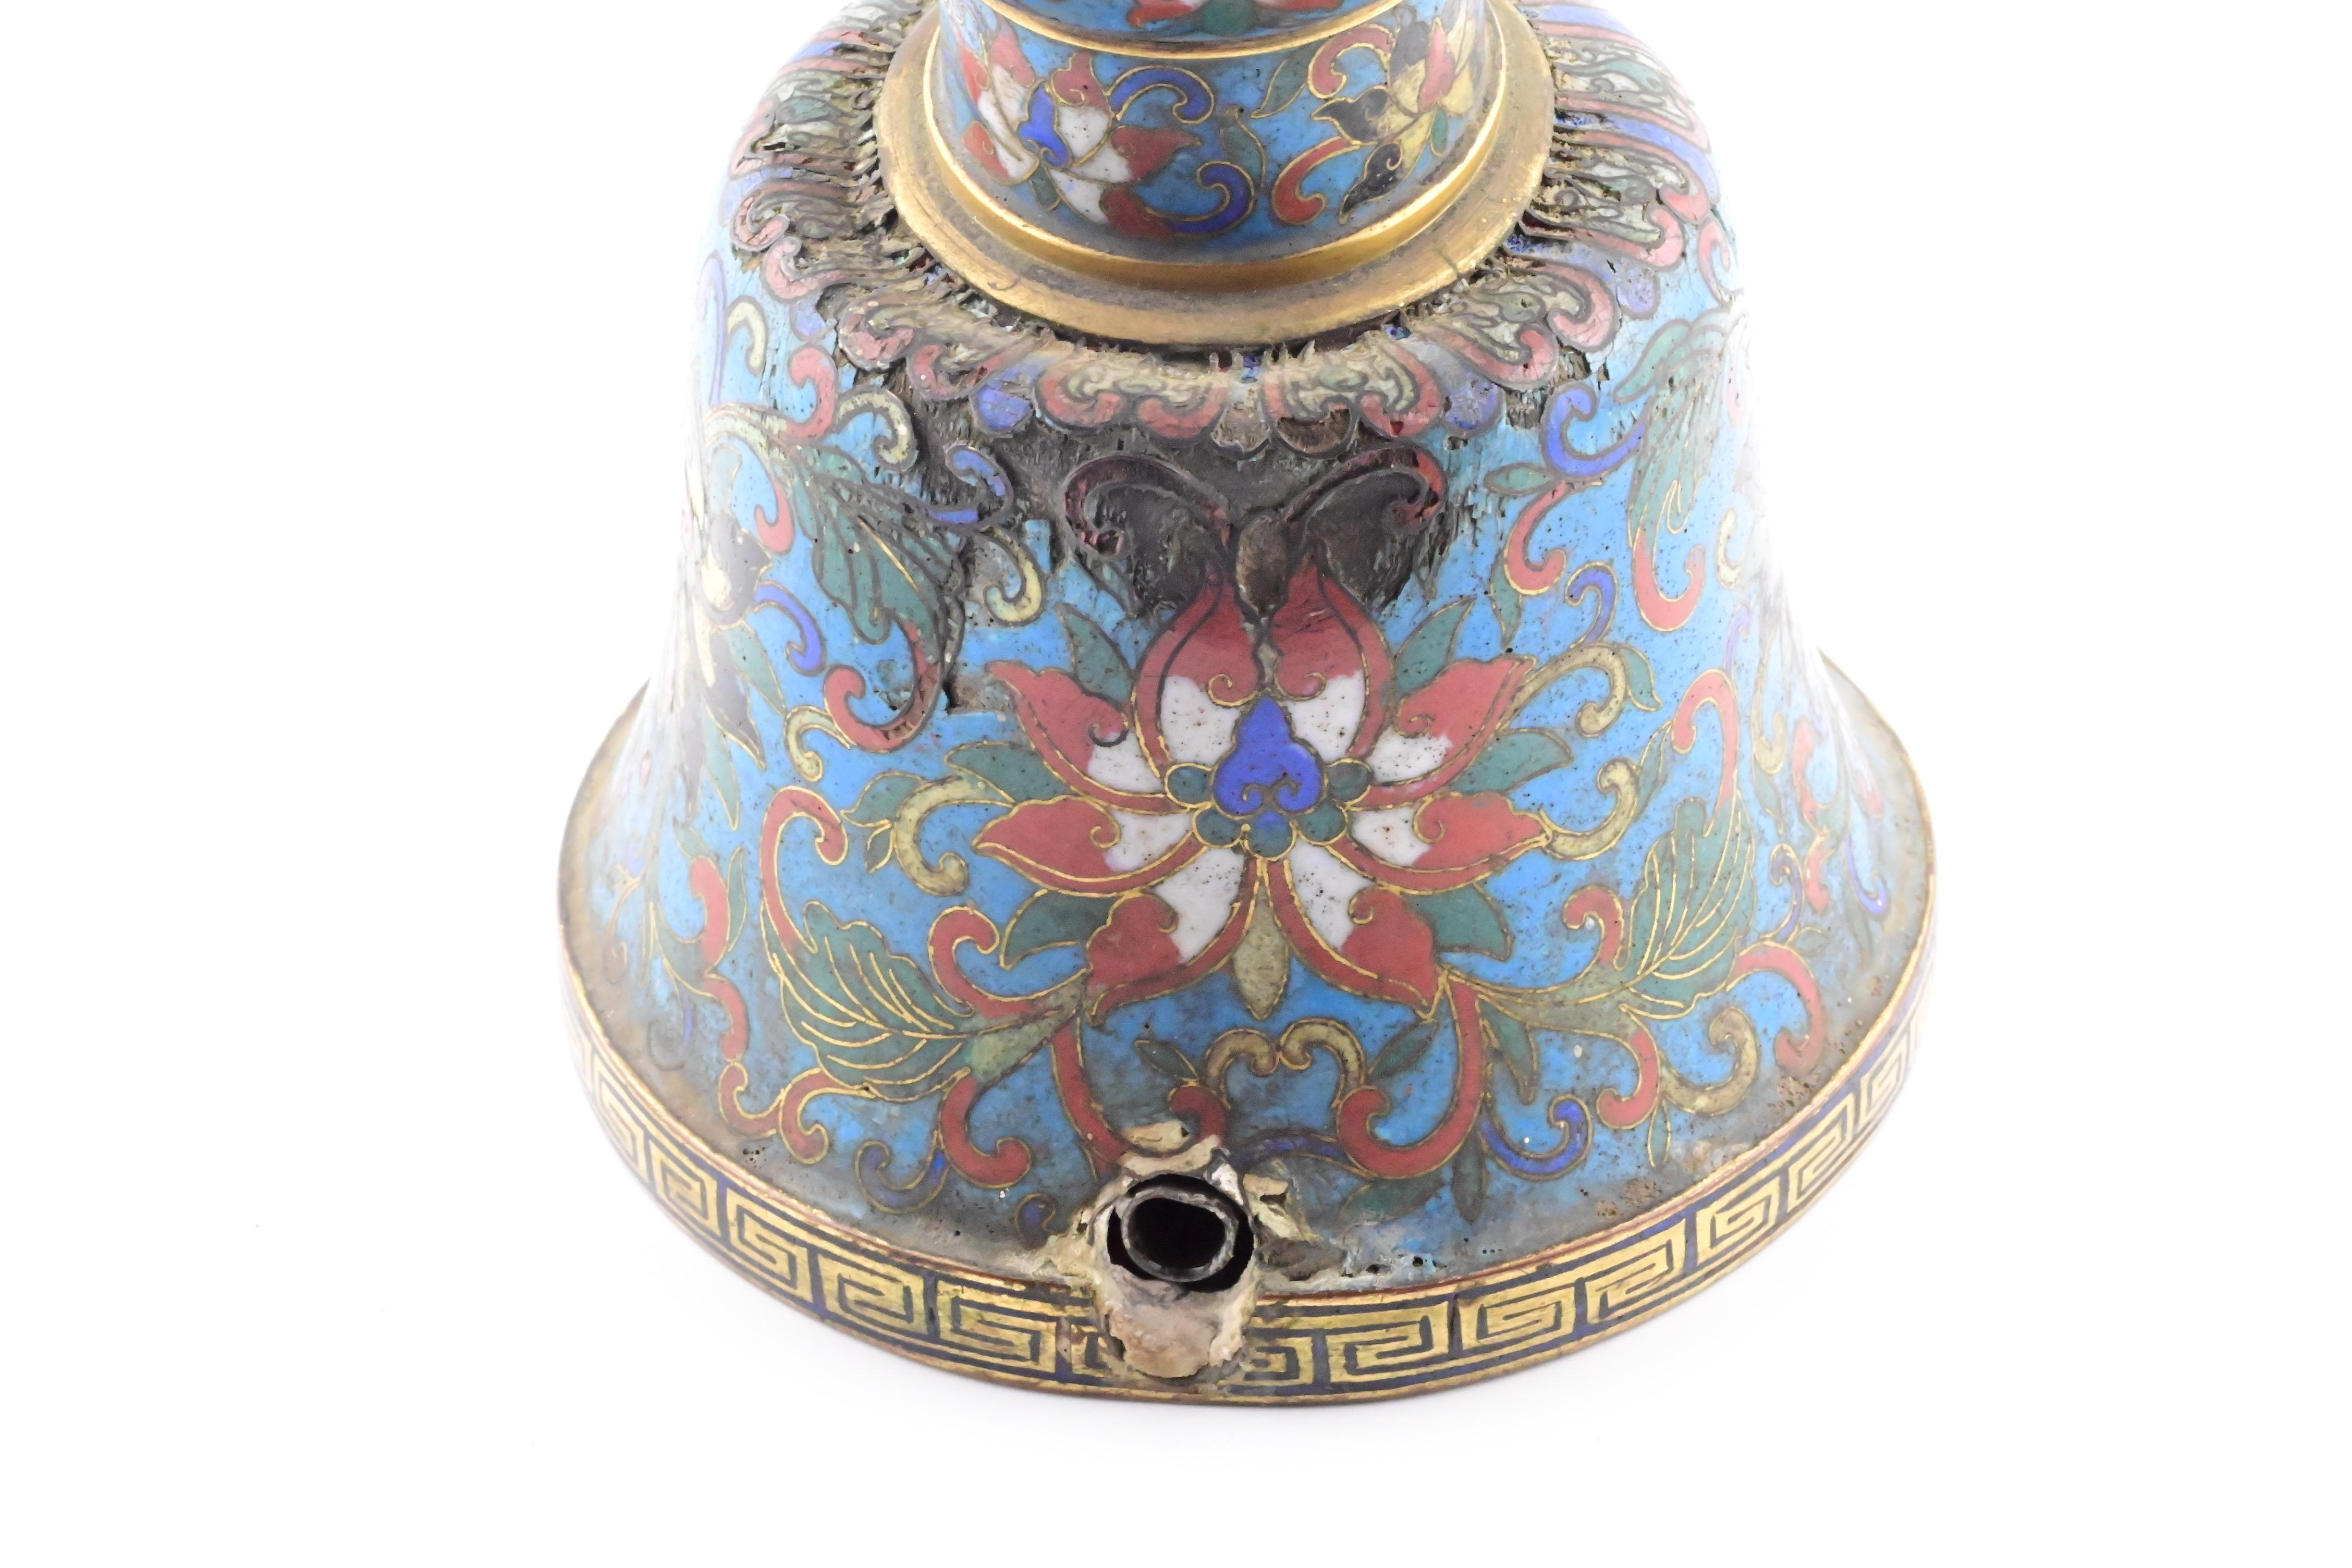 This is an exquisite 18th century Chinese cloisonné bronze candle holder from the Qianlong period. The piece features intricate designs and patterns, showcasing the skillful craftsmanship of the time. It is made of bronze and adorned with colorful